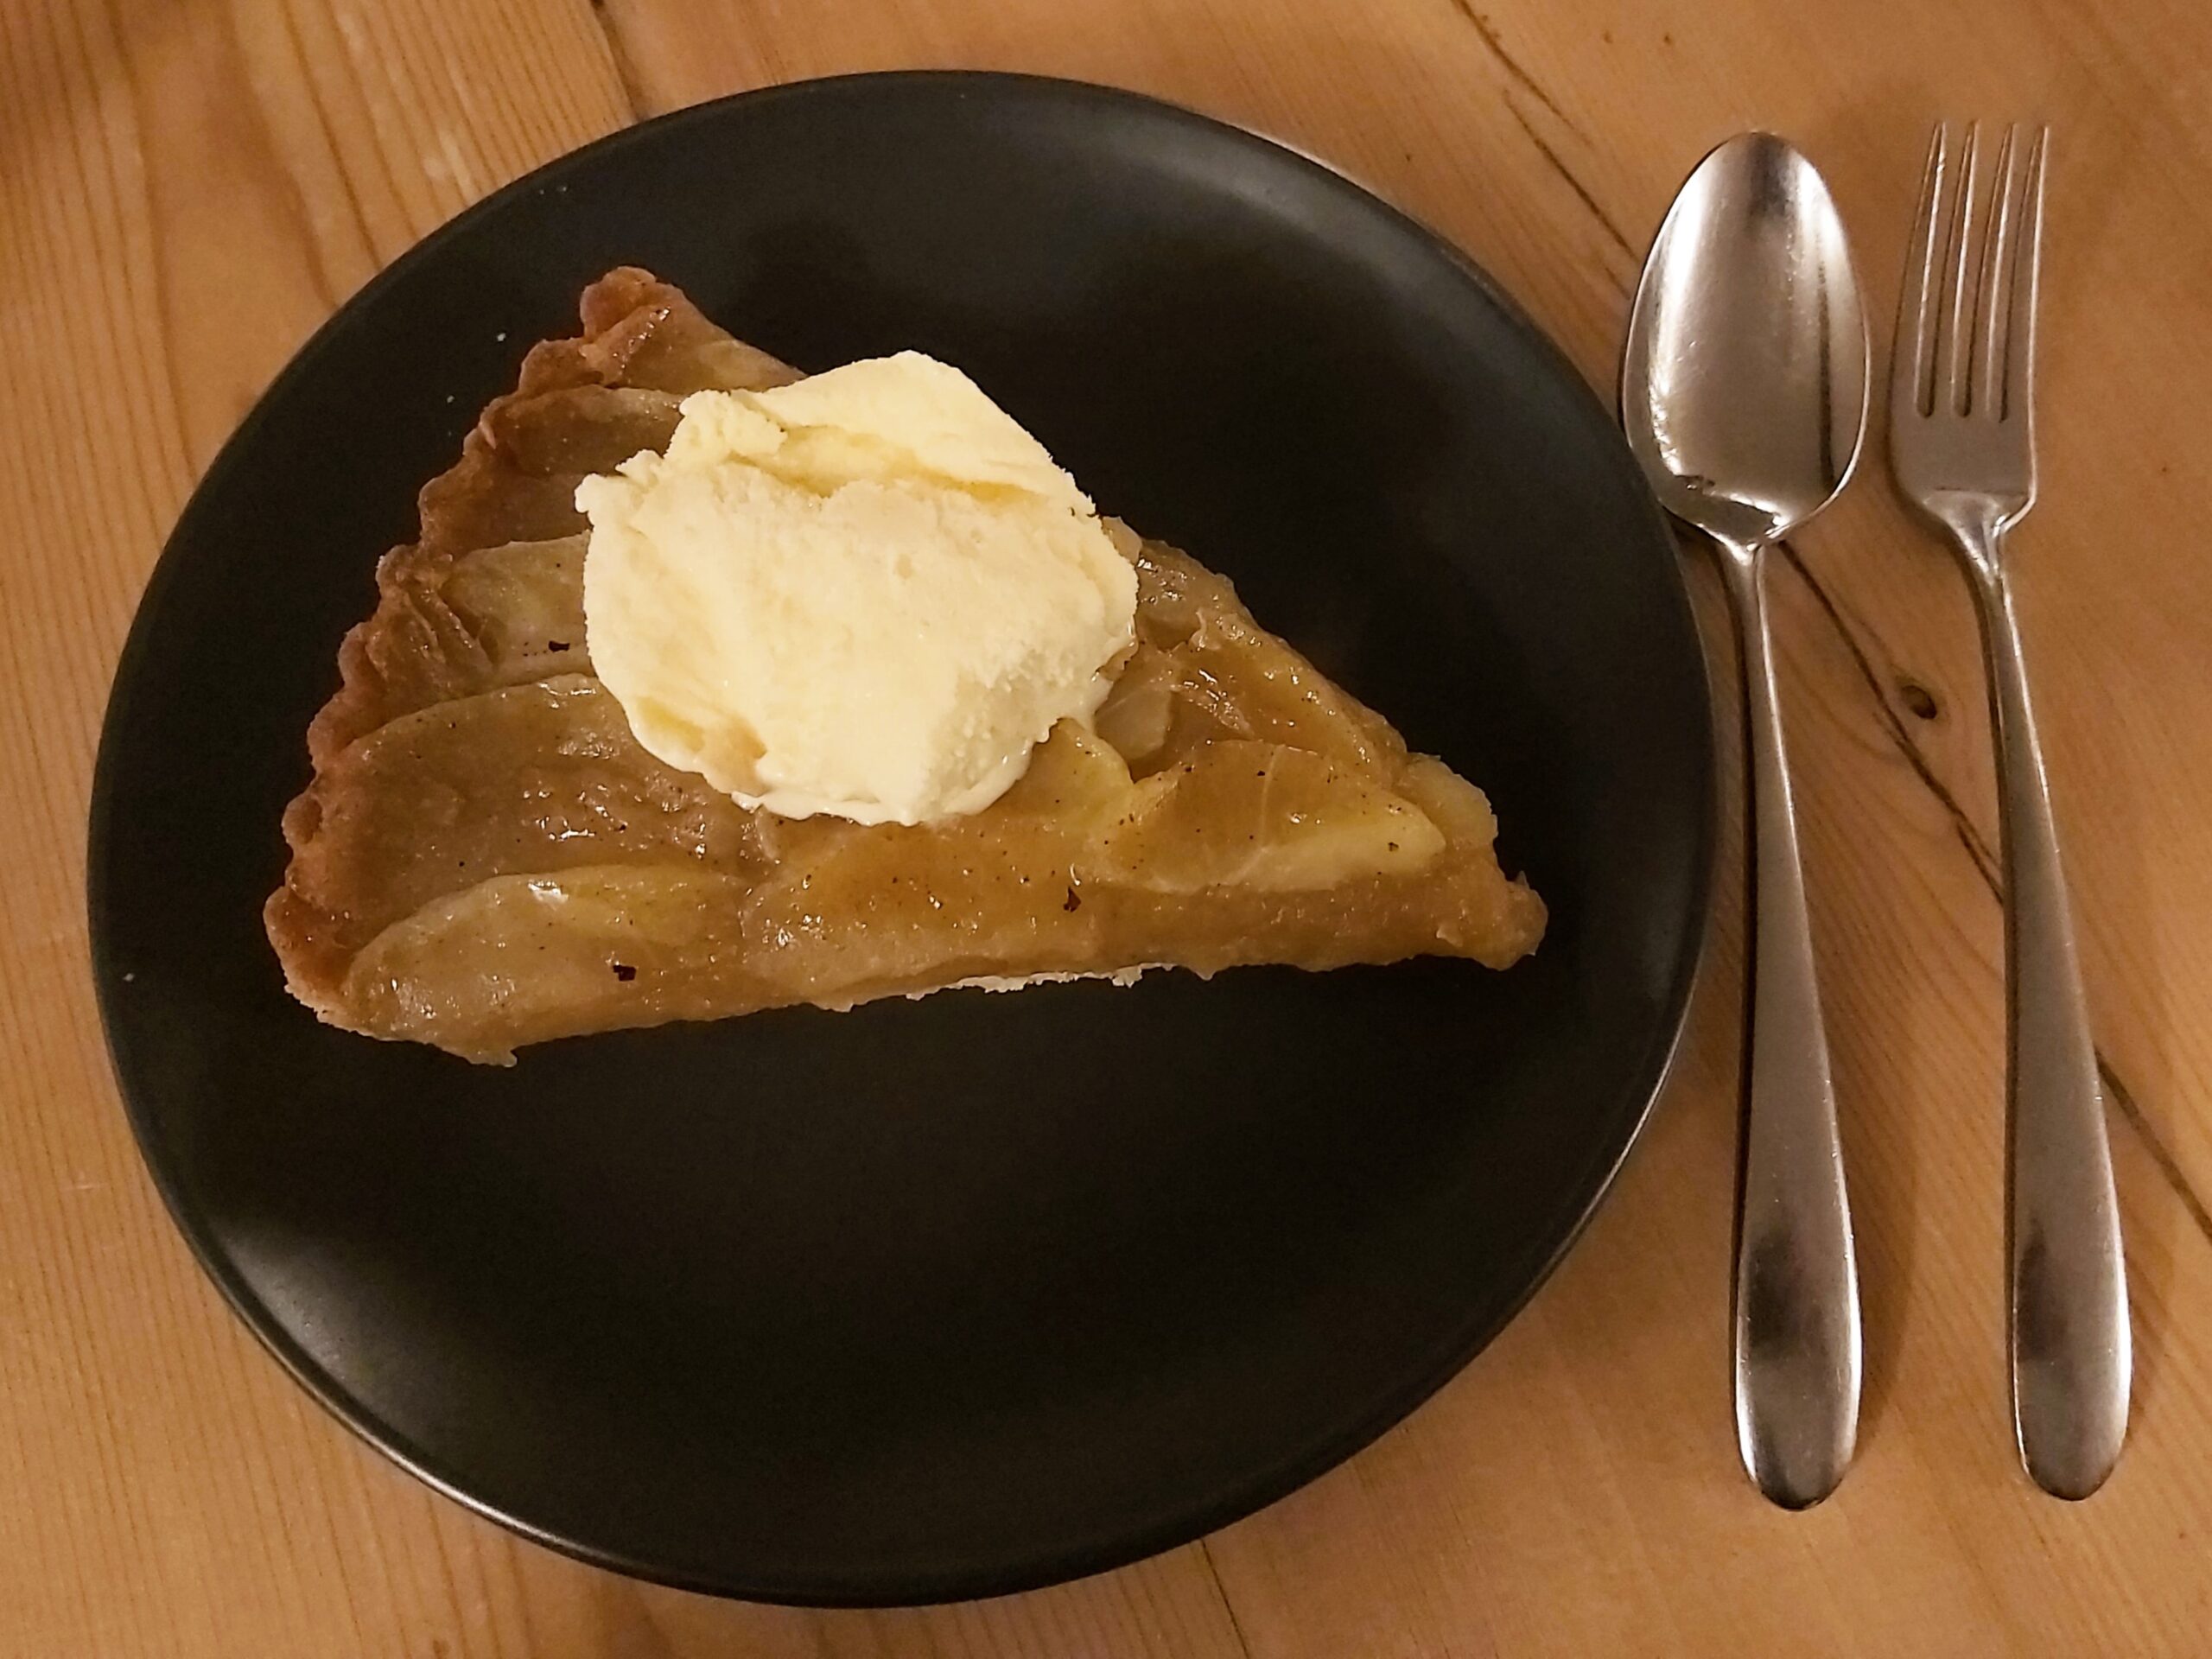 A freshly made fruit pie with ice cream from the Boot Inn, in Houghton, Hampshire, England